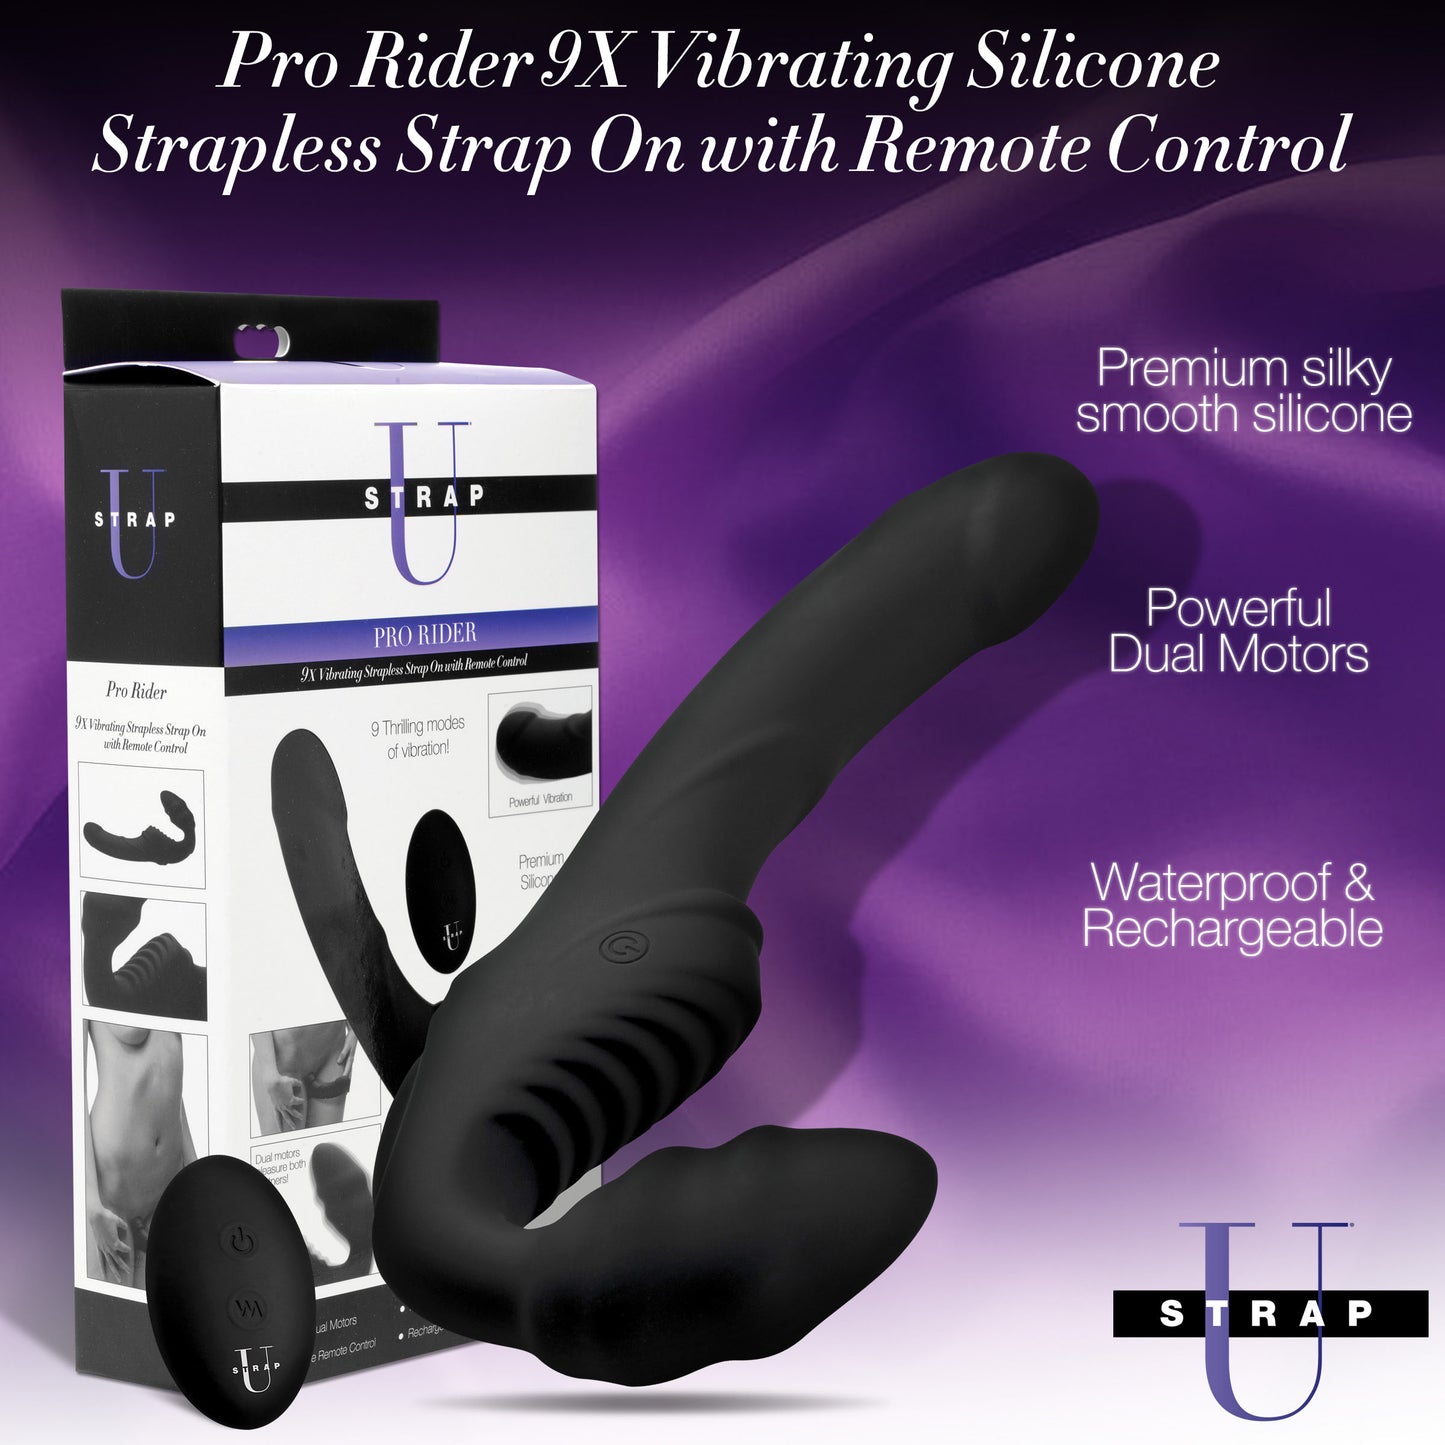 Pro Rider 9x Vibrating Silicone Strapless Strap On With Remote Control